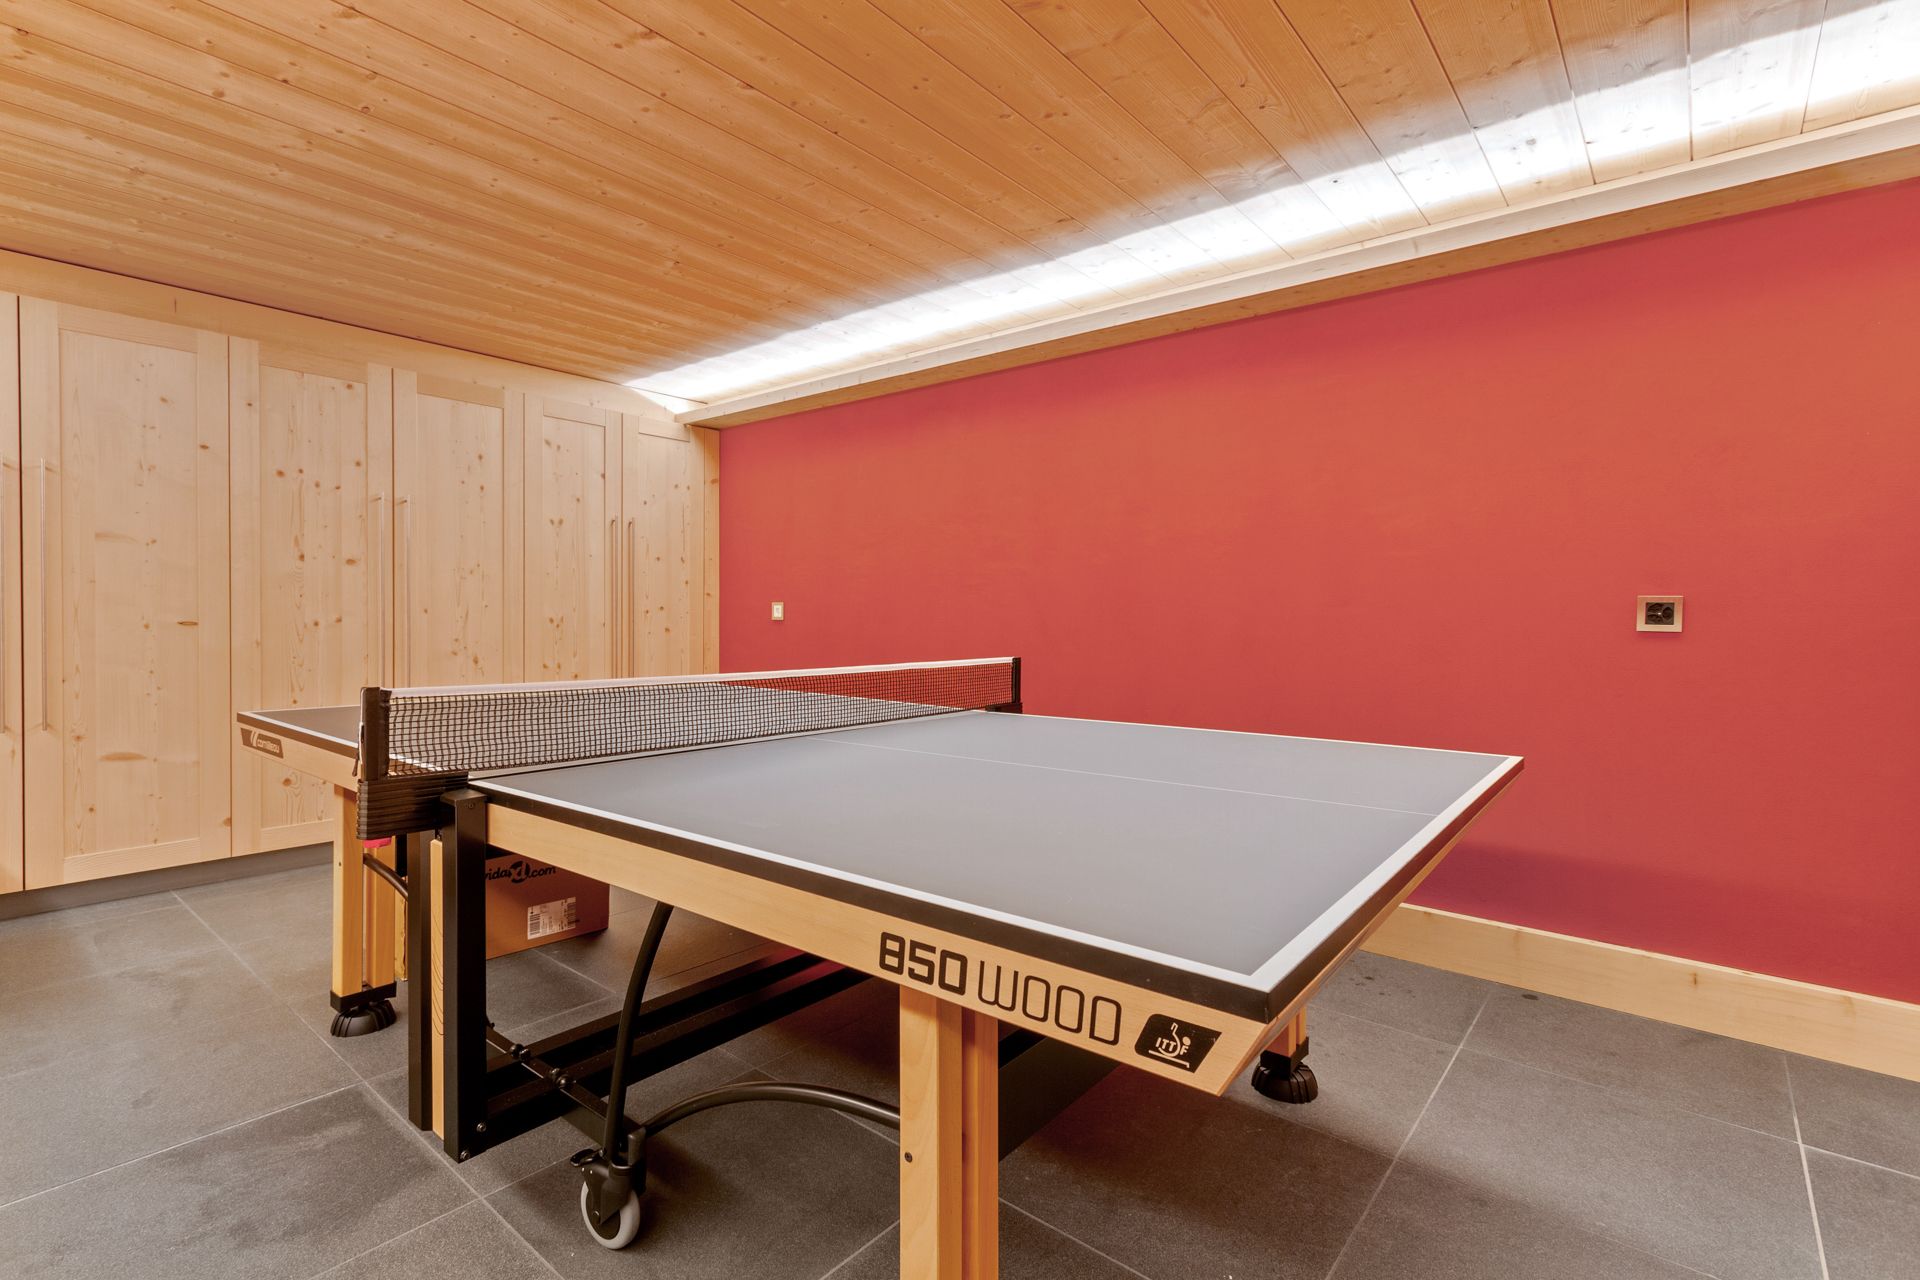 Games room in the basement